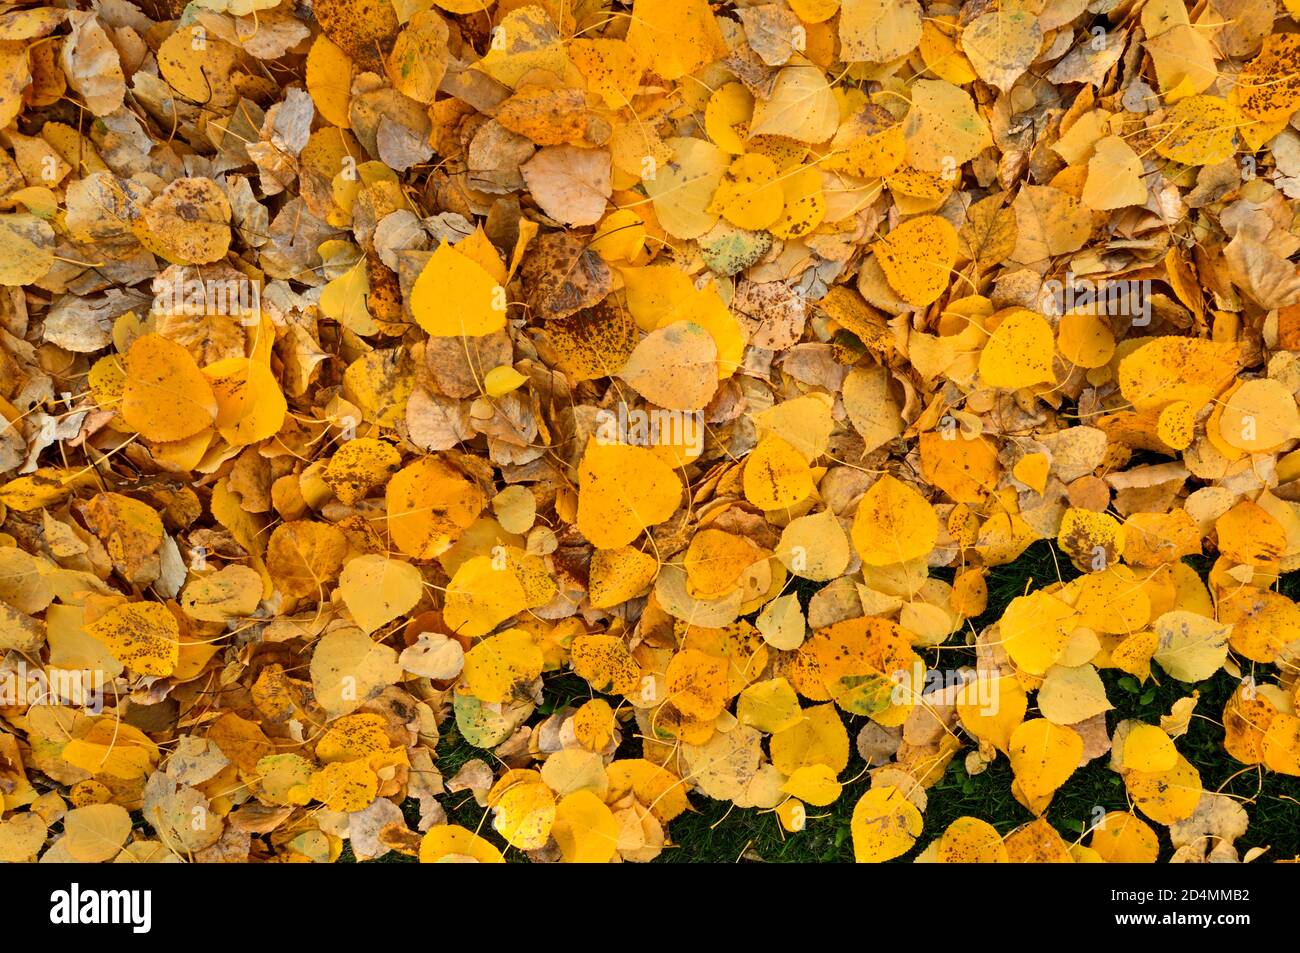 Aspen leaves that have fallen to the ground from the trees in rural Alberta Canada. Stock Photo